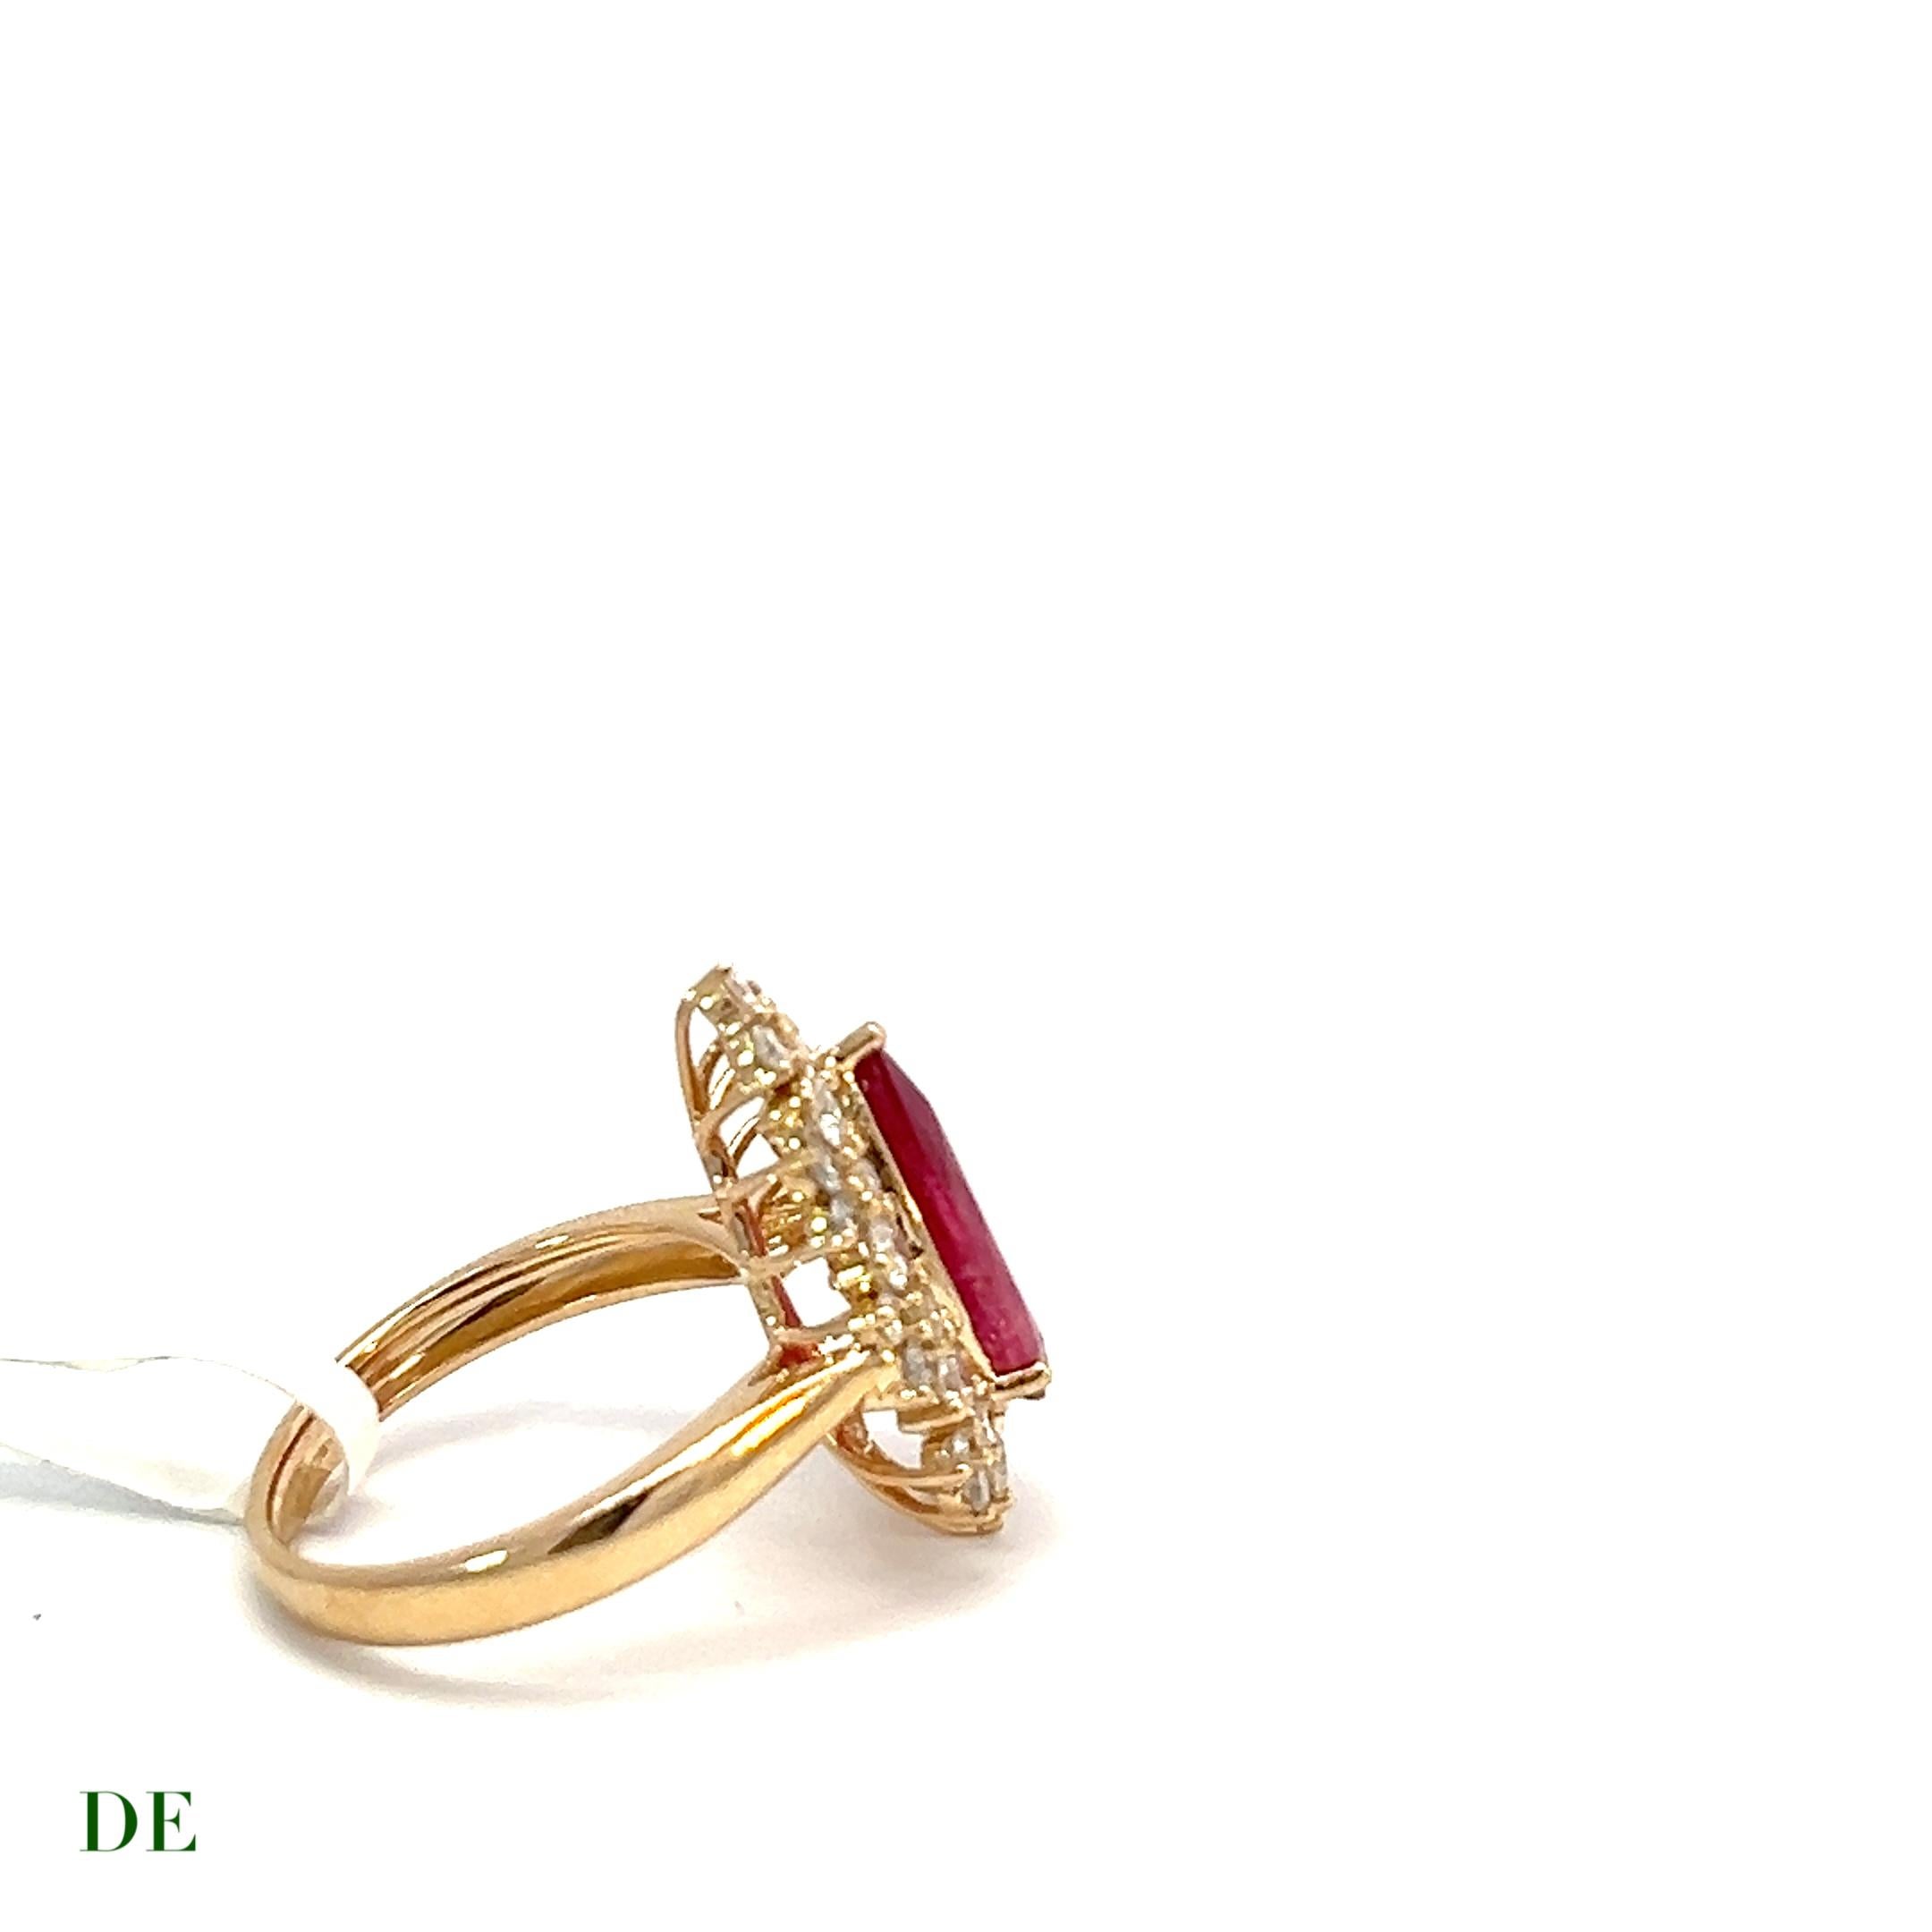 Women's or Men's Rare 14k 2.69ct Pear Vivid Red Rubellite with 1.22ct Statement Diamond Ring